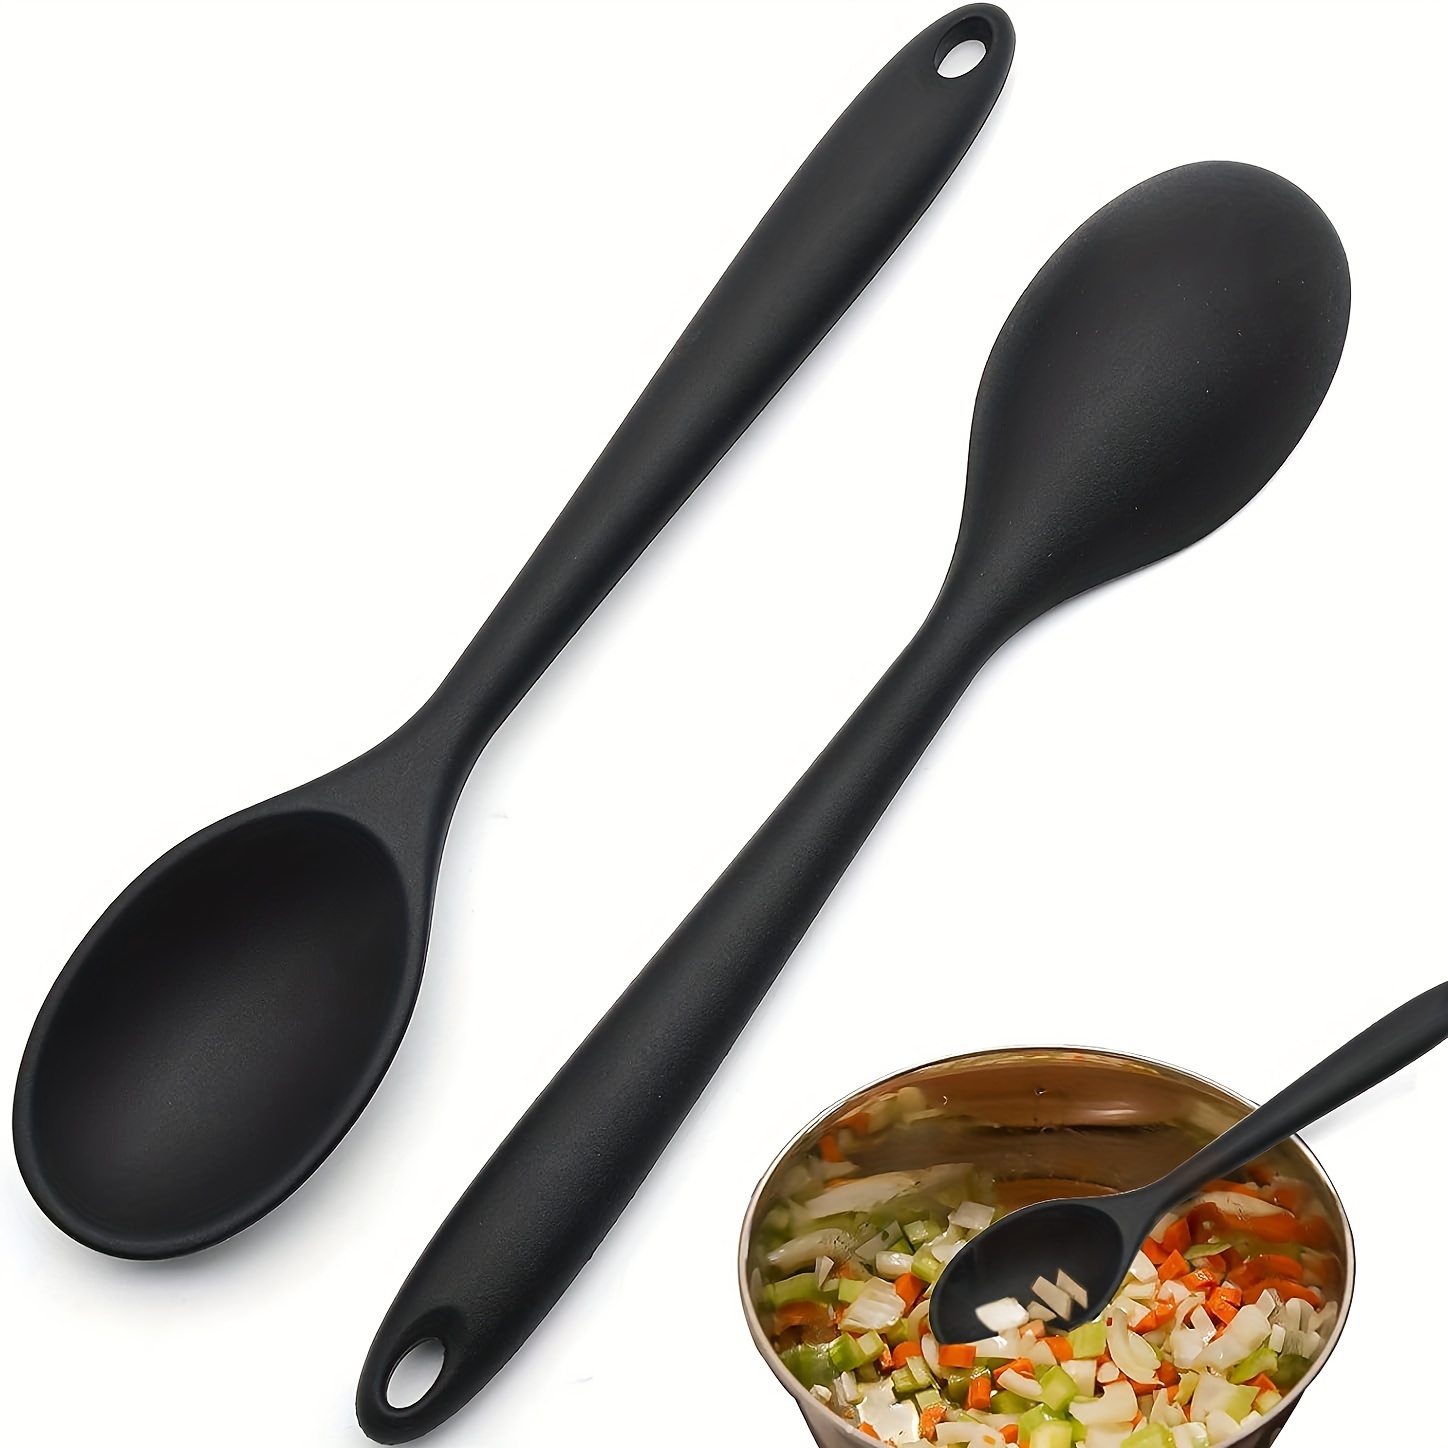 

2pcs, Non-stick Silicone Spoons, Cooking Spoons, Silicone, Heat Resistant, Long Handle, Kitchen Spoon, Kitchen Baking, Stirring Tools, Bpa-free For Cooking Utensils, Mixing Scoops, Serving Spoon